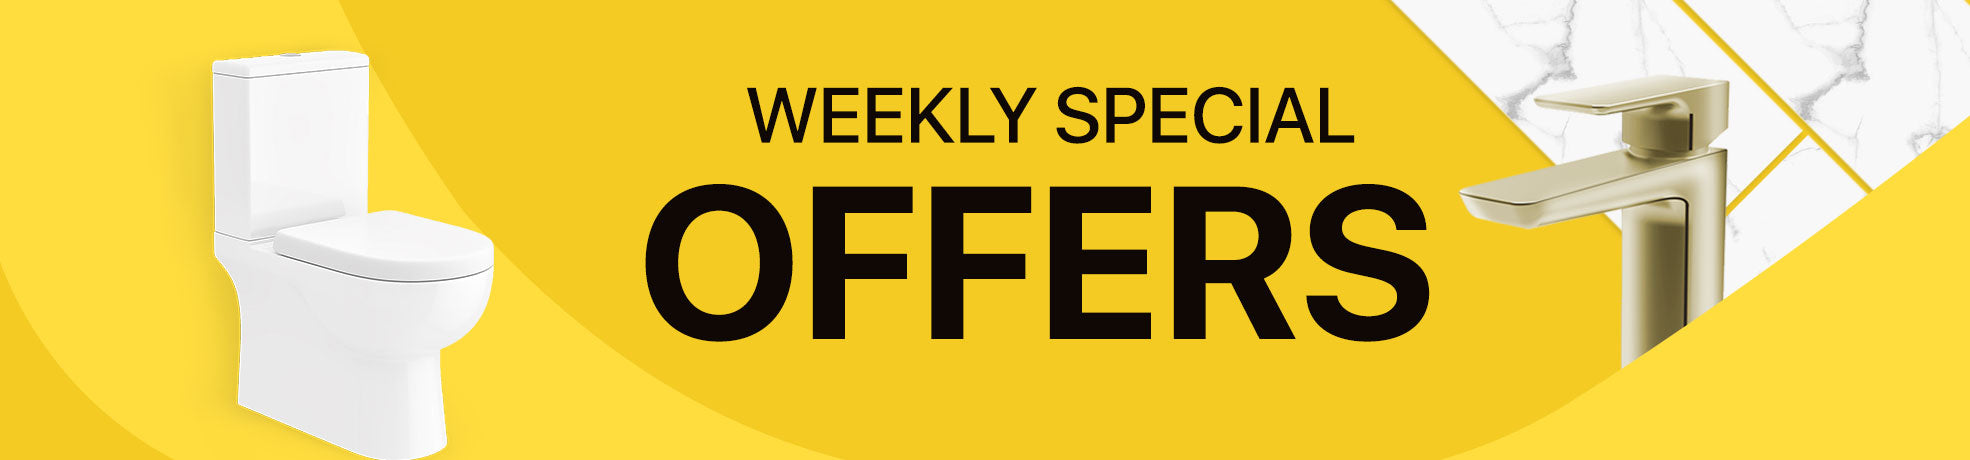 Weekly Special Offers